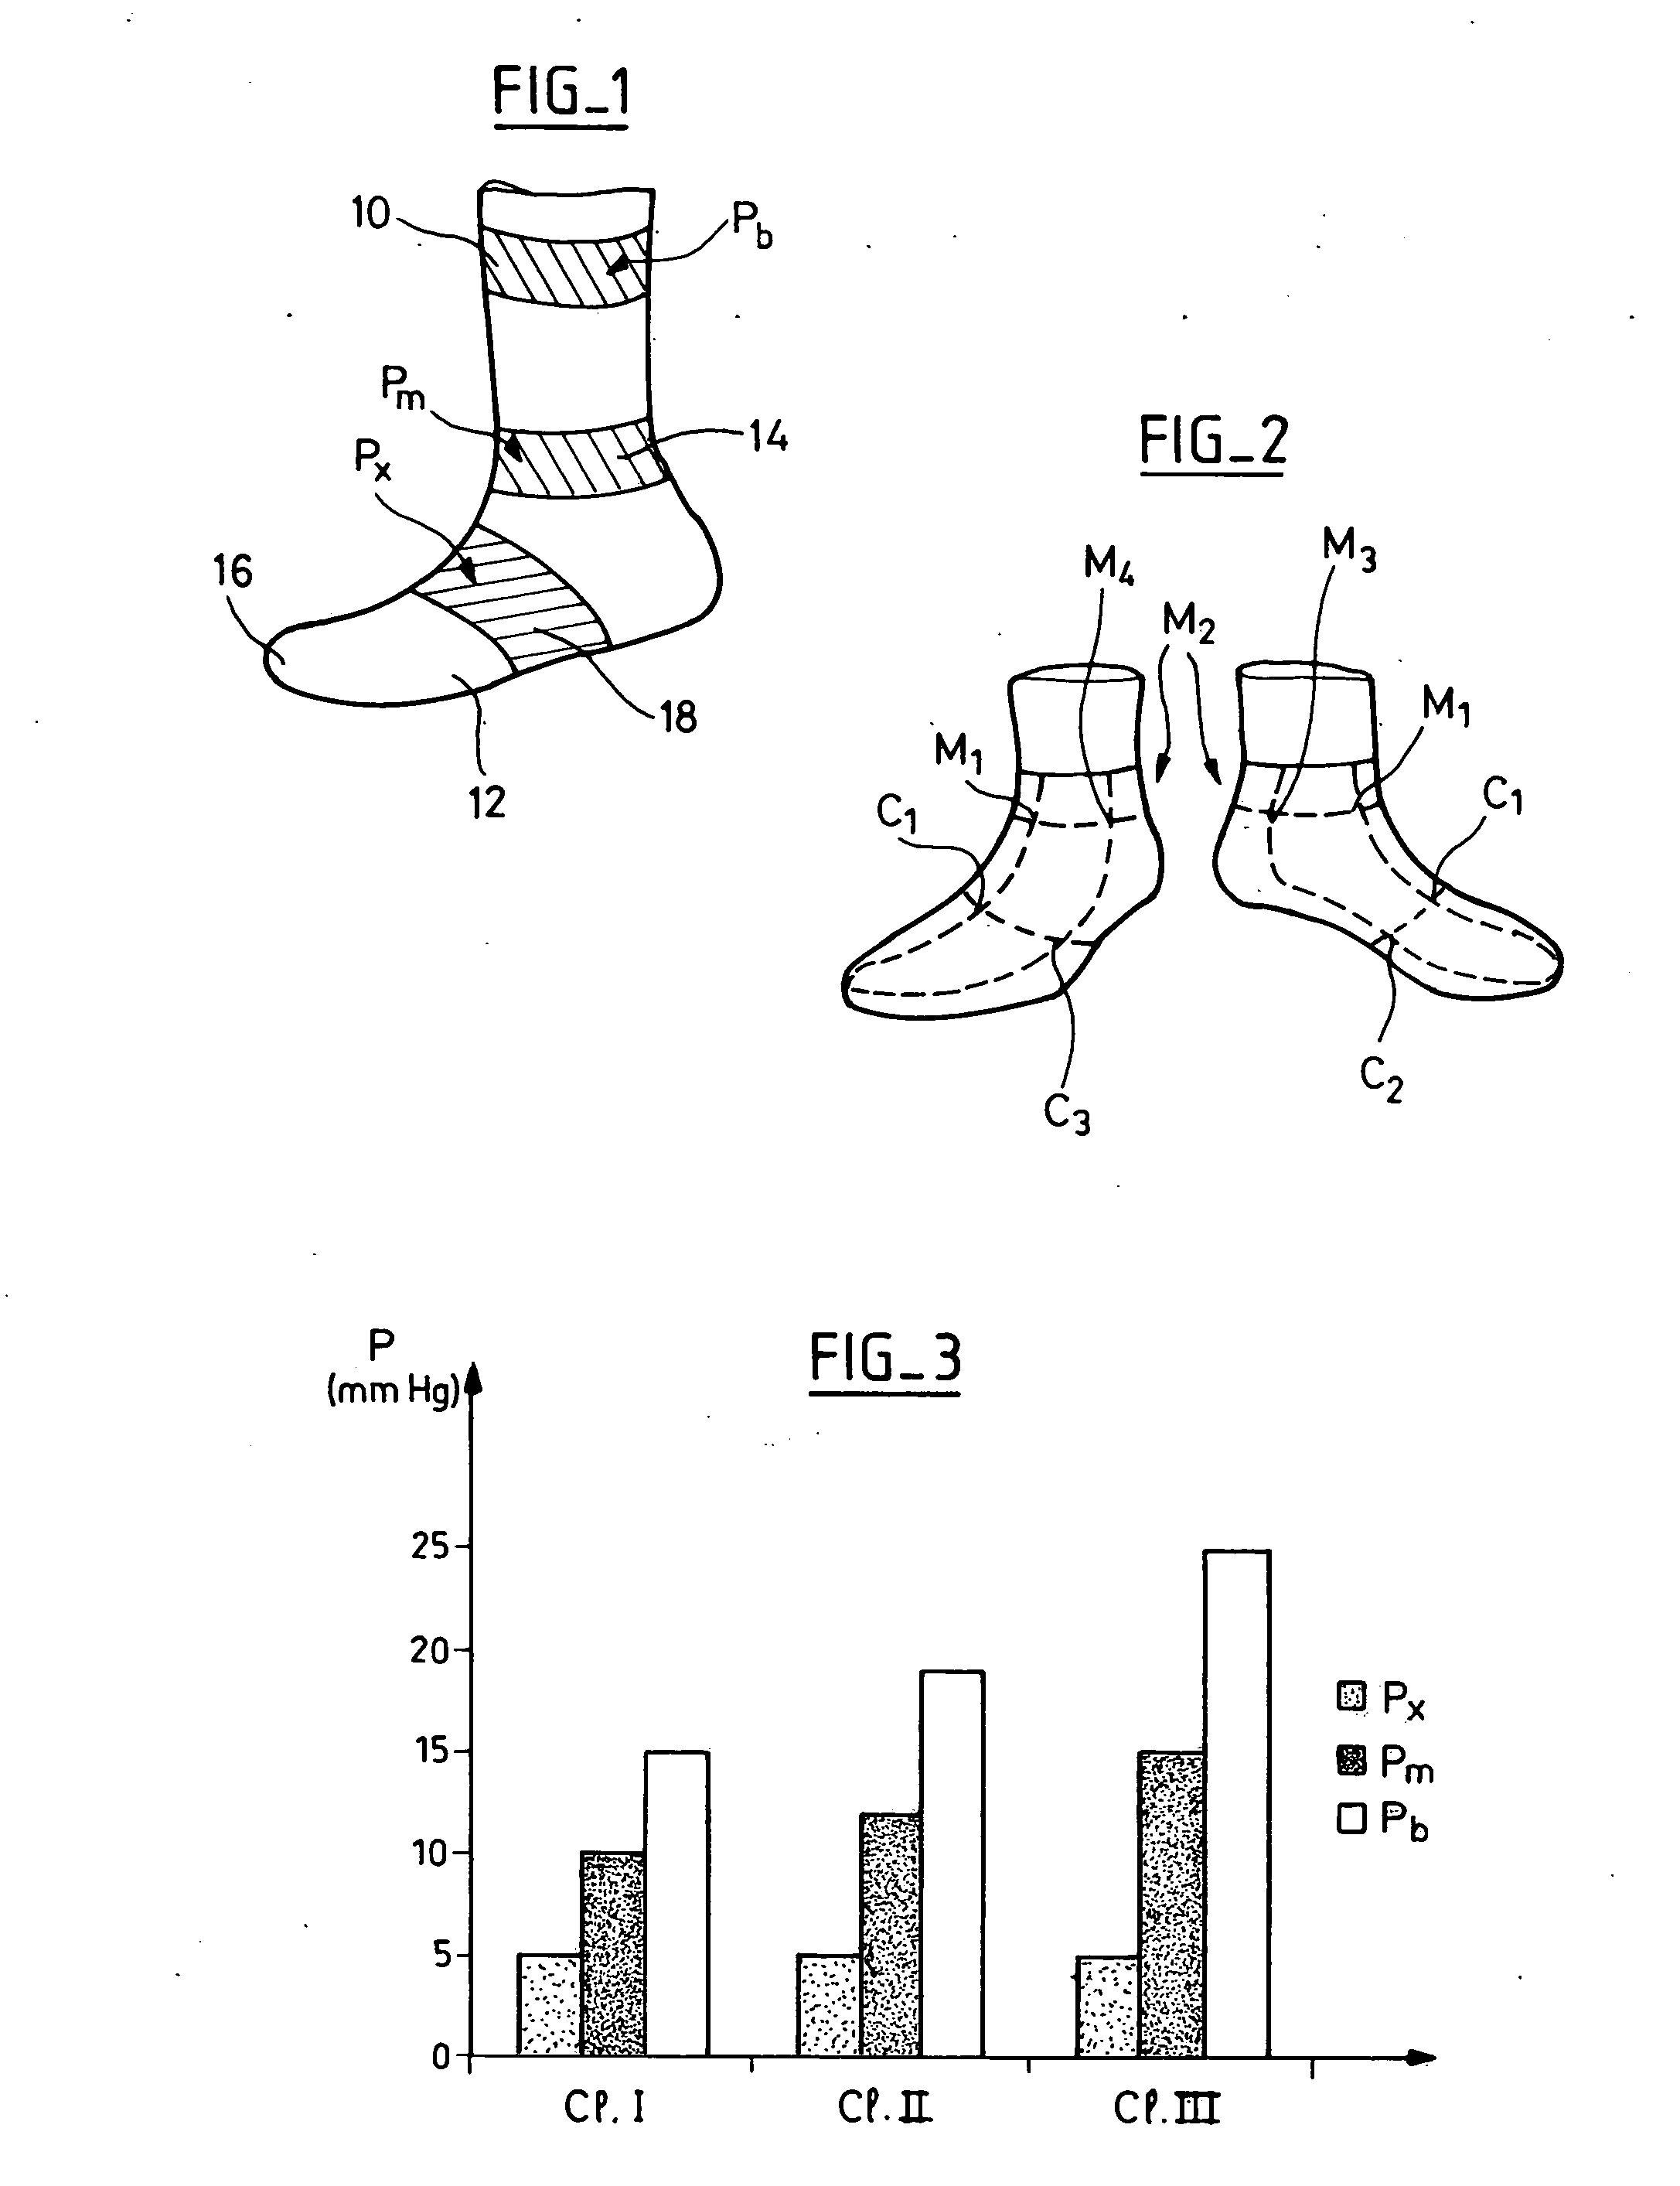 Compressive orthosis for the lower limb in the form of a knitted article of the stocking, sock, or tights type